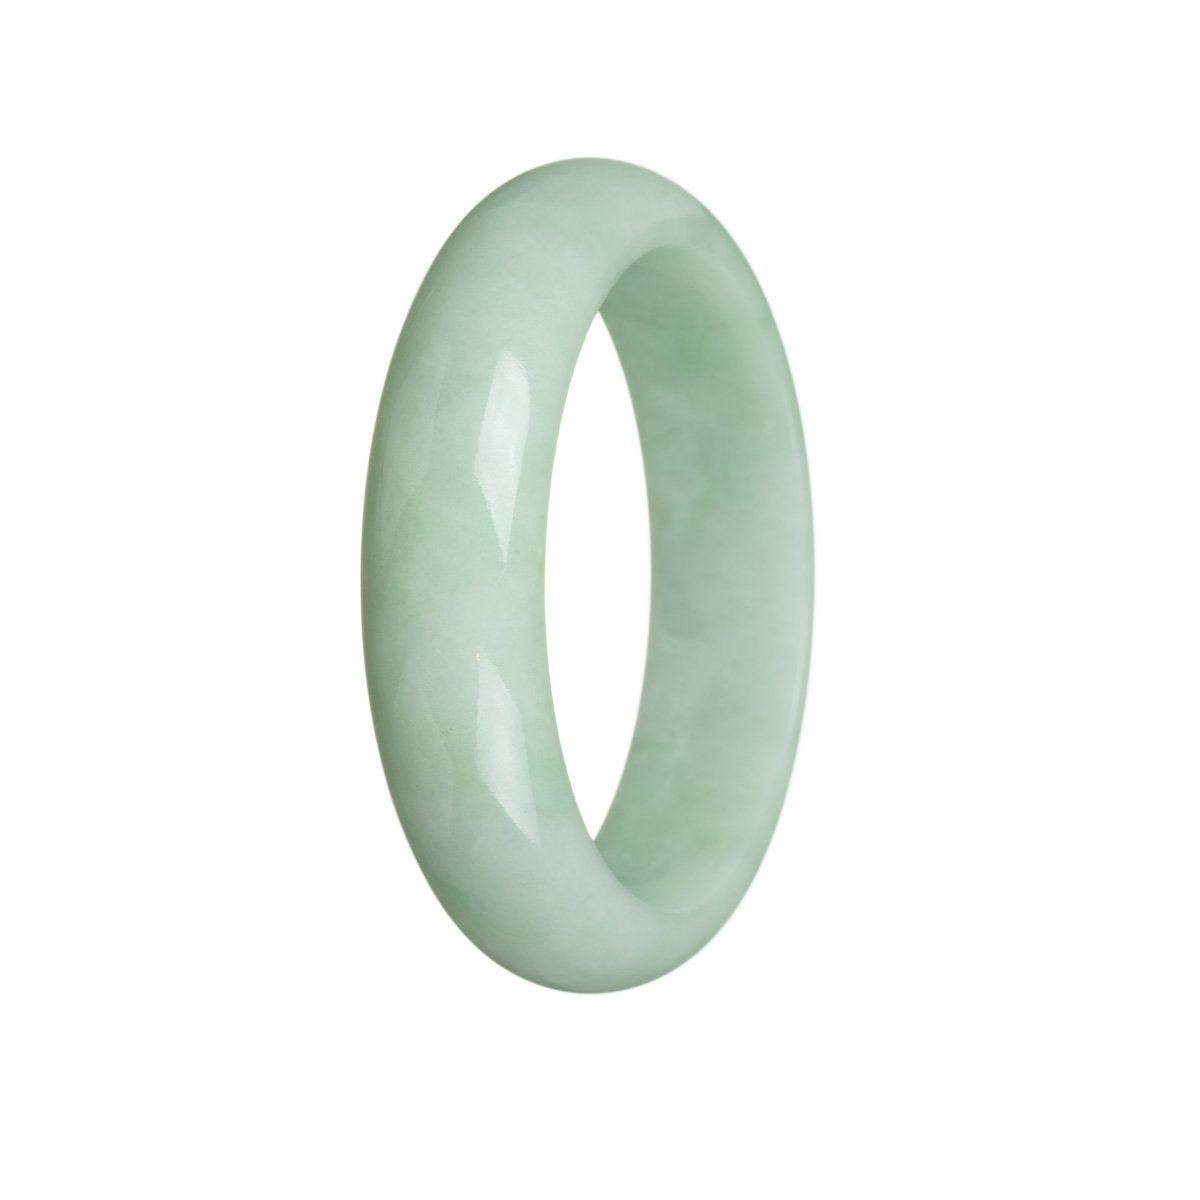 A half moon-shaped, 58mm traditional jade bangle in a genuine natural light green color. Perfect for adding a touch of elegance to any outfit.